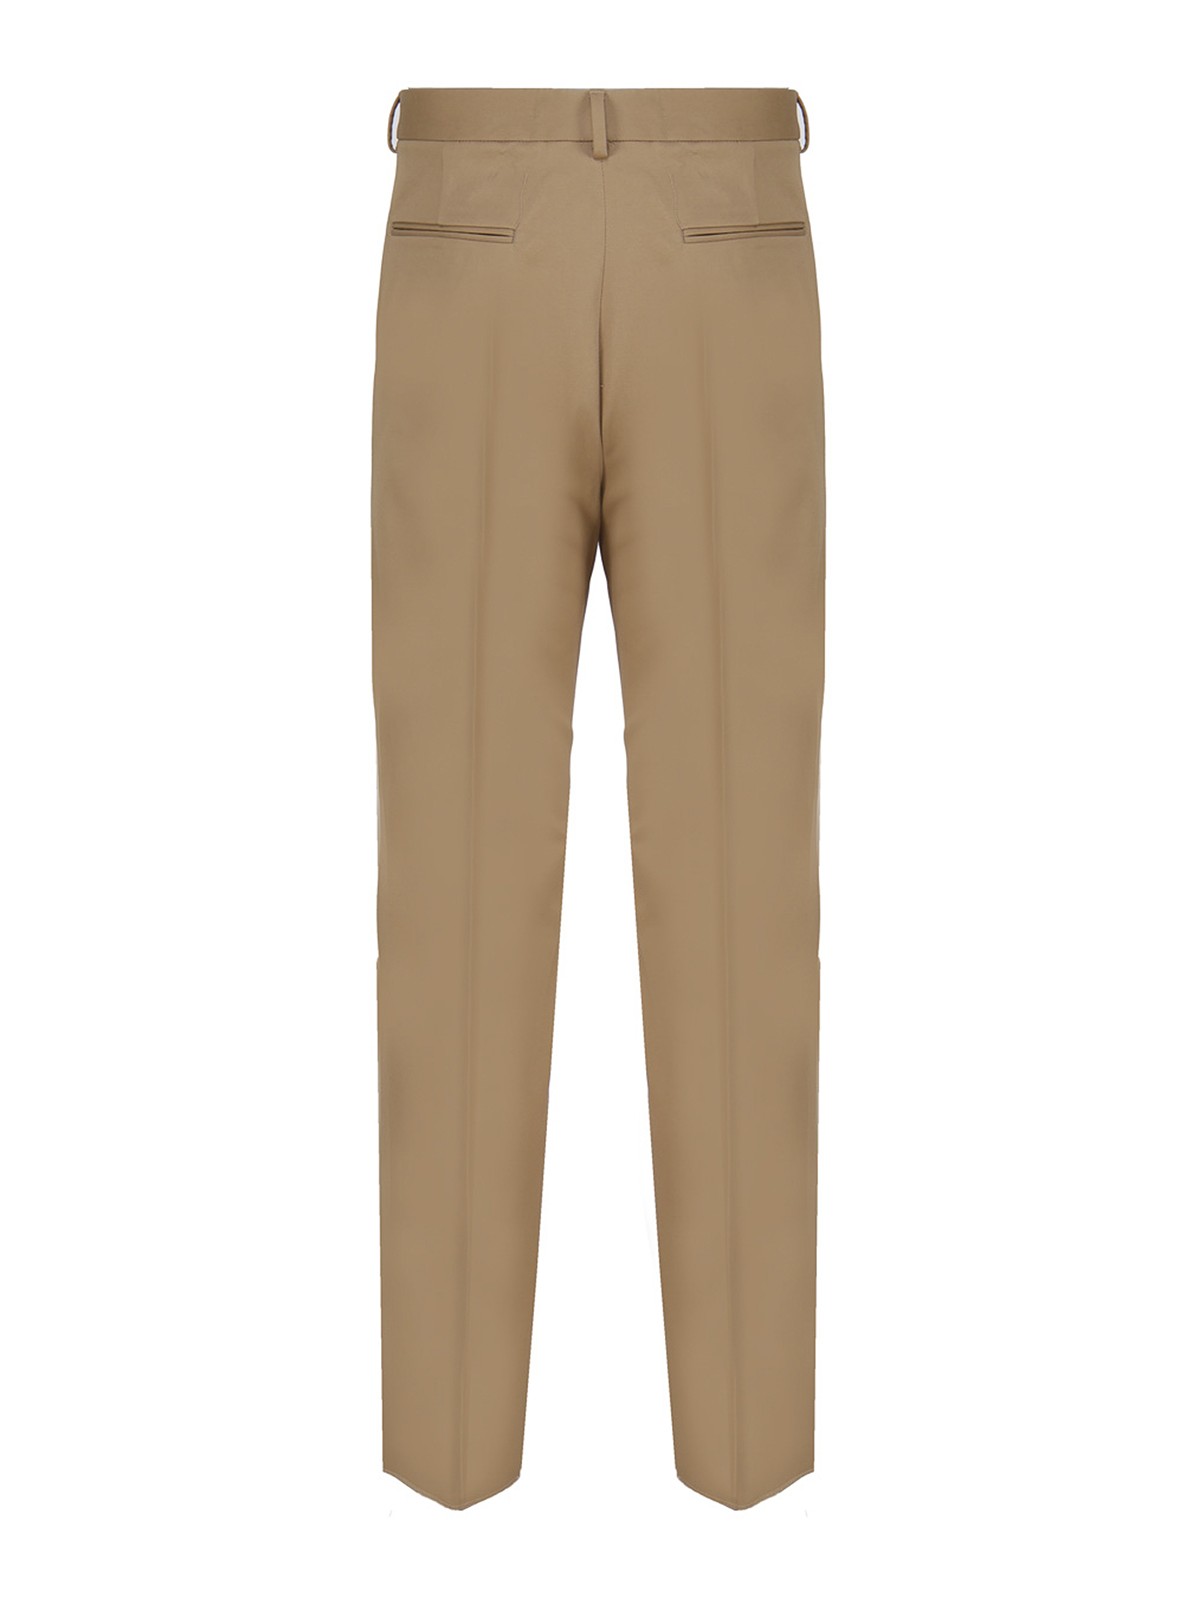 Buy Men Olive Solid Regular Fit Trousers Online in India - Monte Carlo